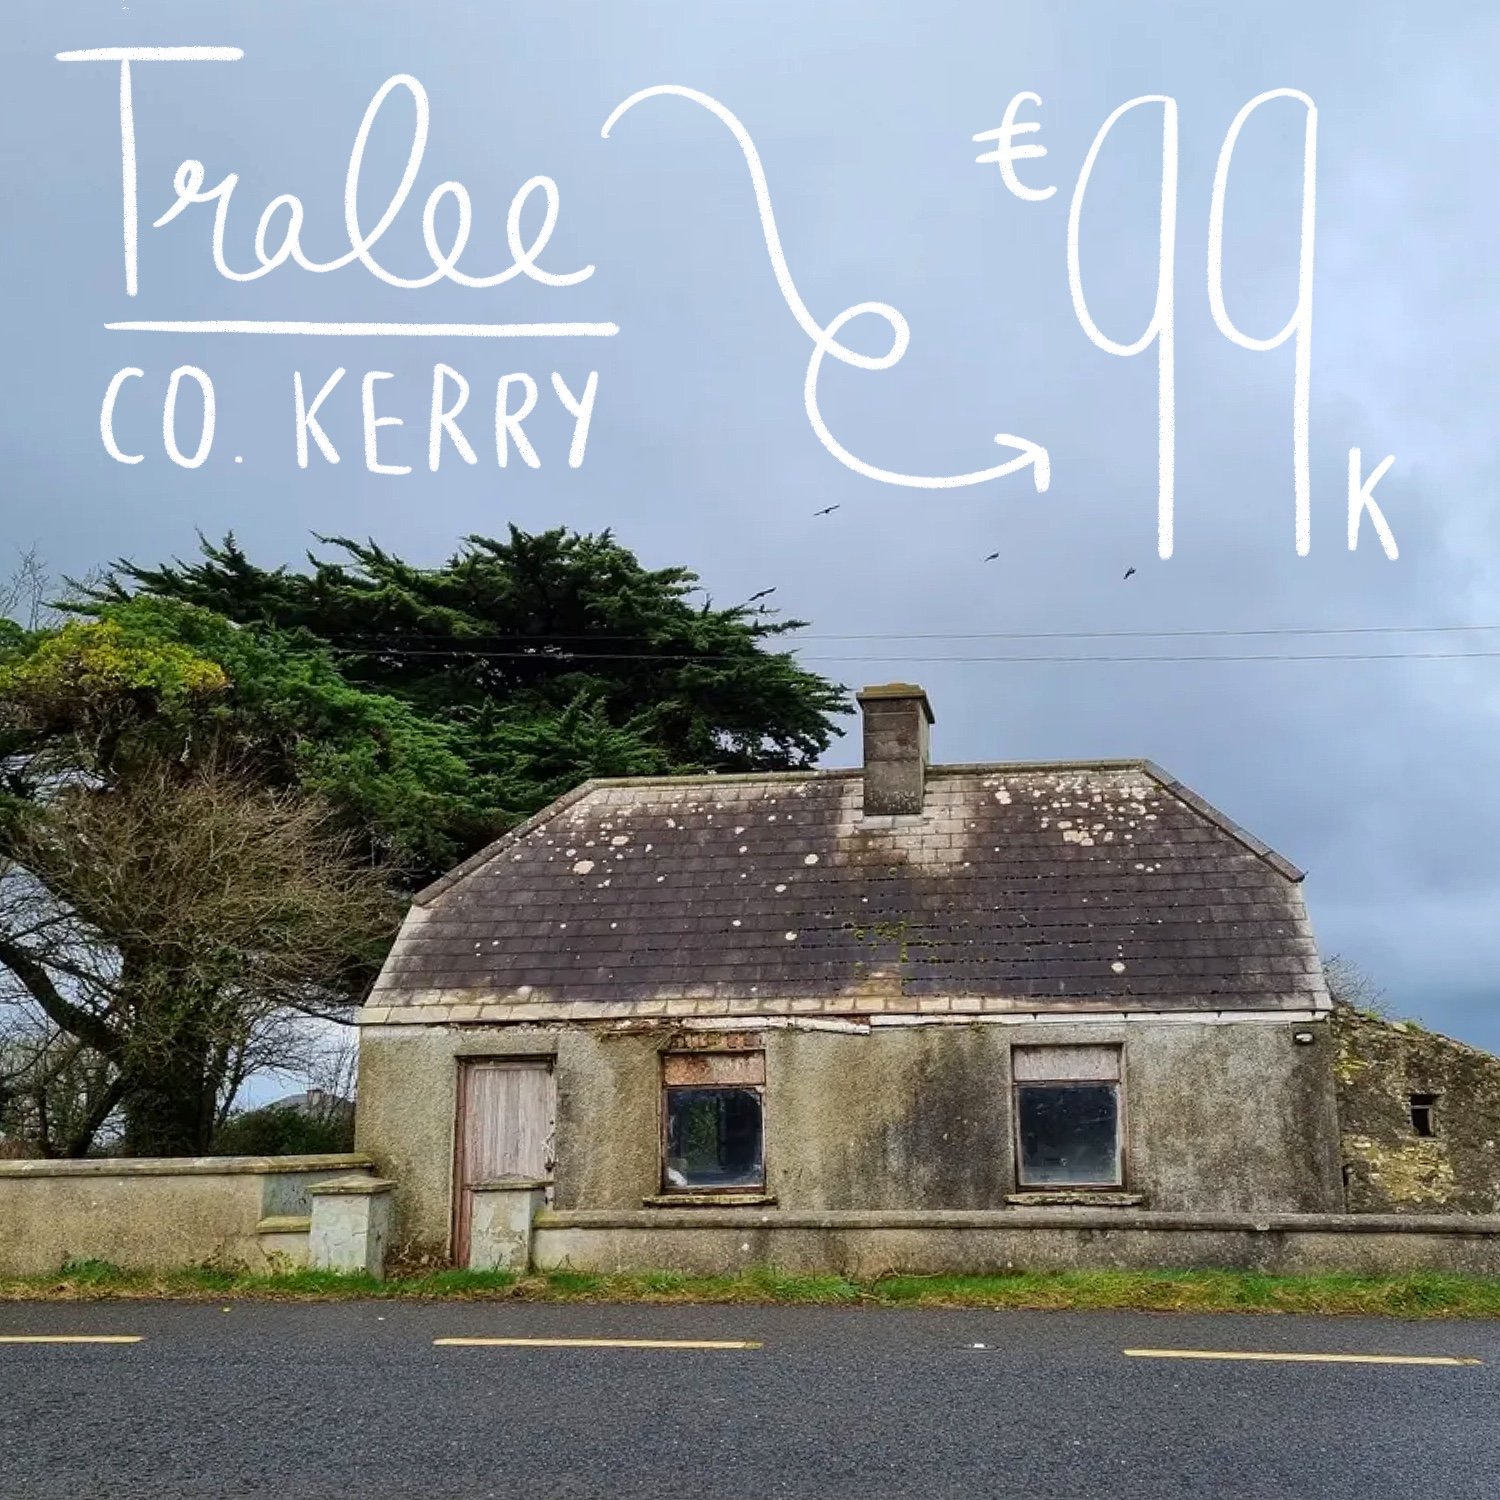 Leampreaghane, Tralee, Co. Kerry. €99k